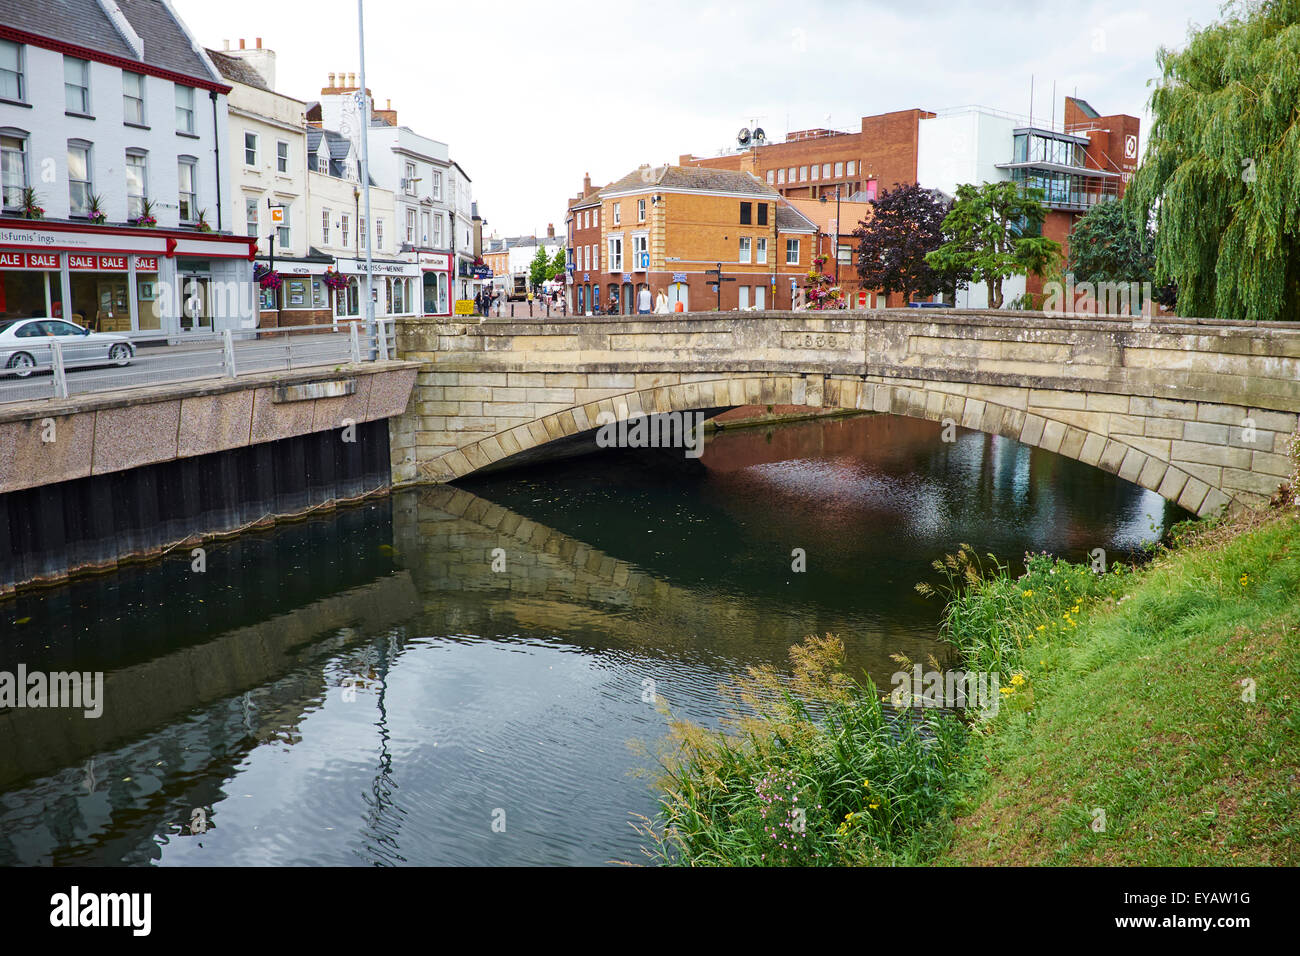 High Bridge Over The River Welland One Of The Seven Bridges Spanning The River In Spalding Lincolnshire UK Stock Photo